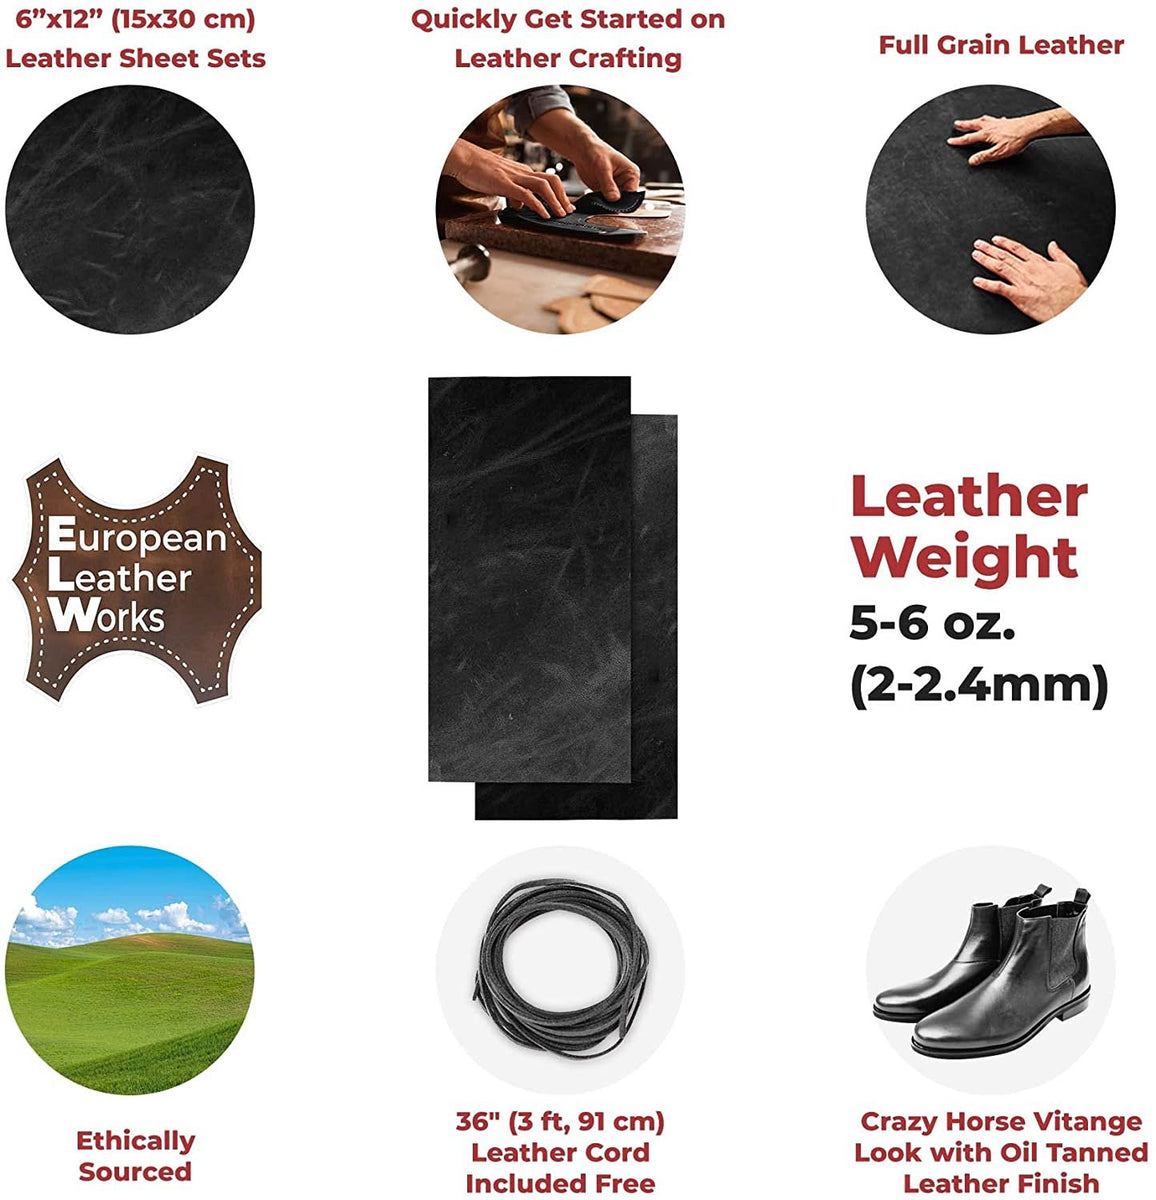 ELW Full Grain Leather Tobacco Brown Scraps 5 LBS 5/6 OZ 2-2.4mm Thickness  Weight Cowhide Perfect for Leather Crafts, Tooling Leather, Repair, Hobby,  Workshop 